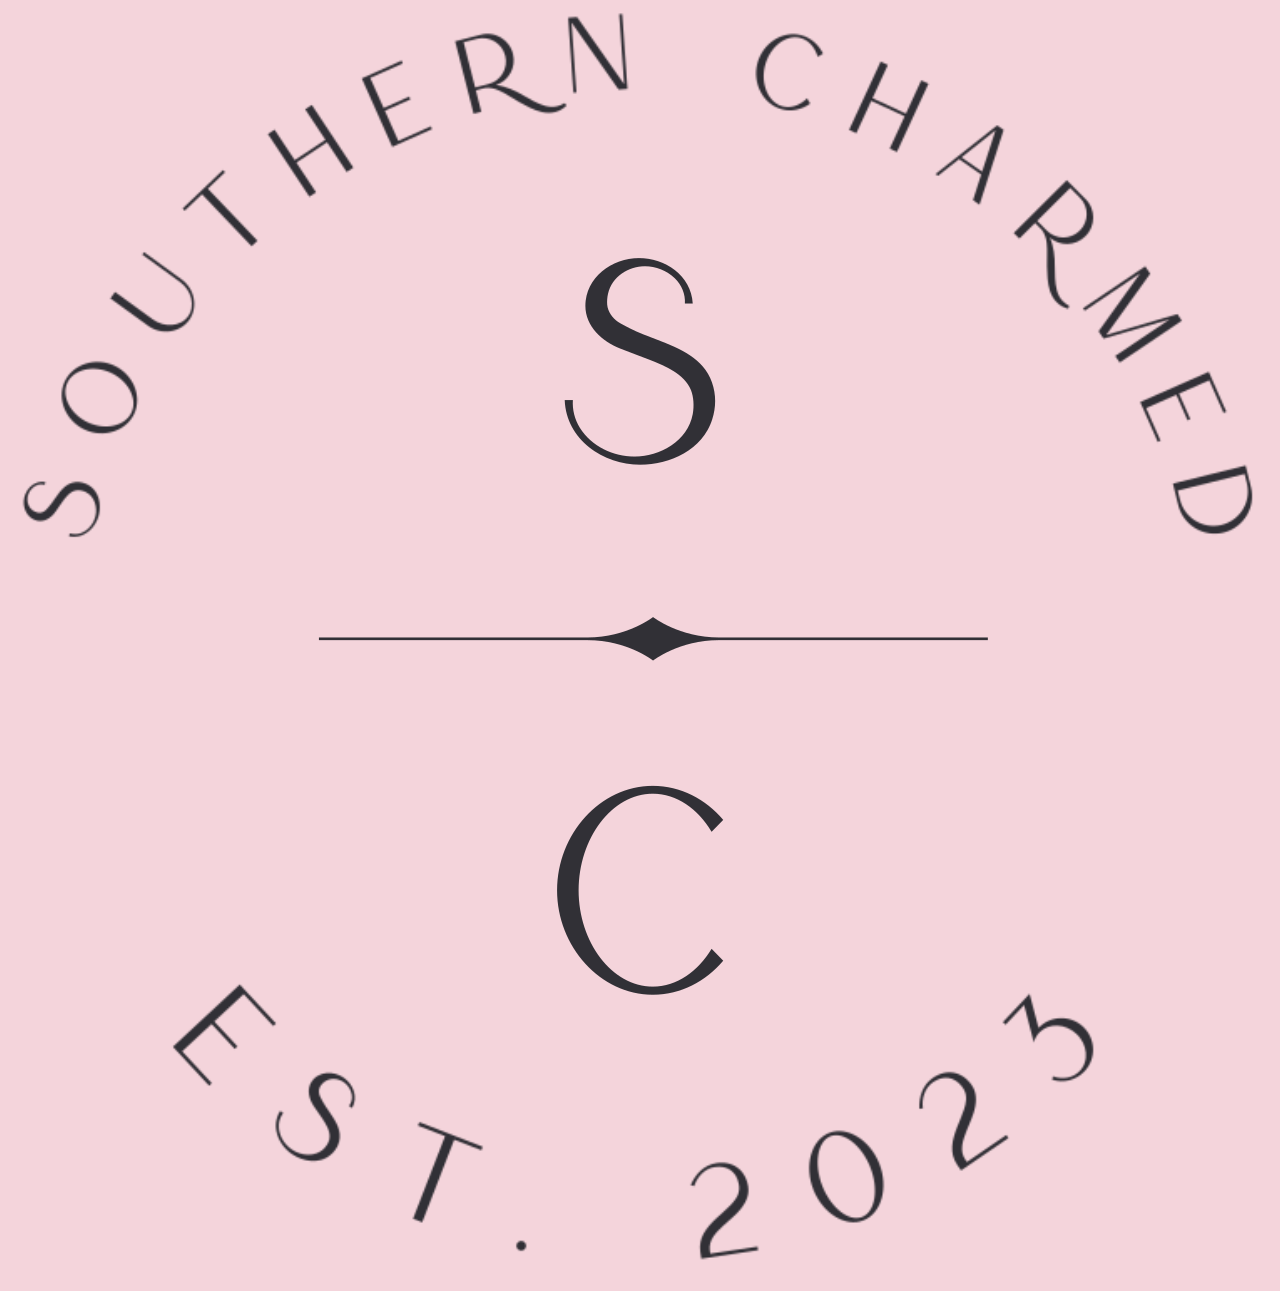 Southern Charmed's logo